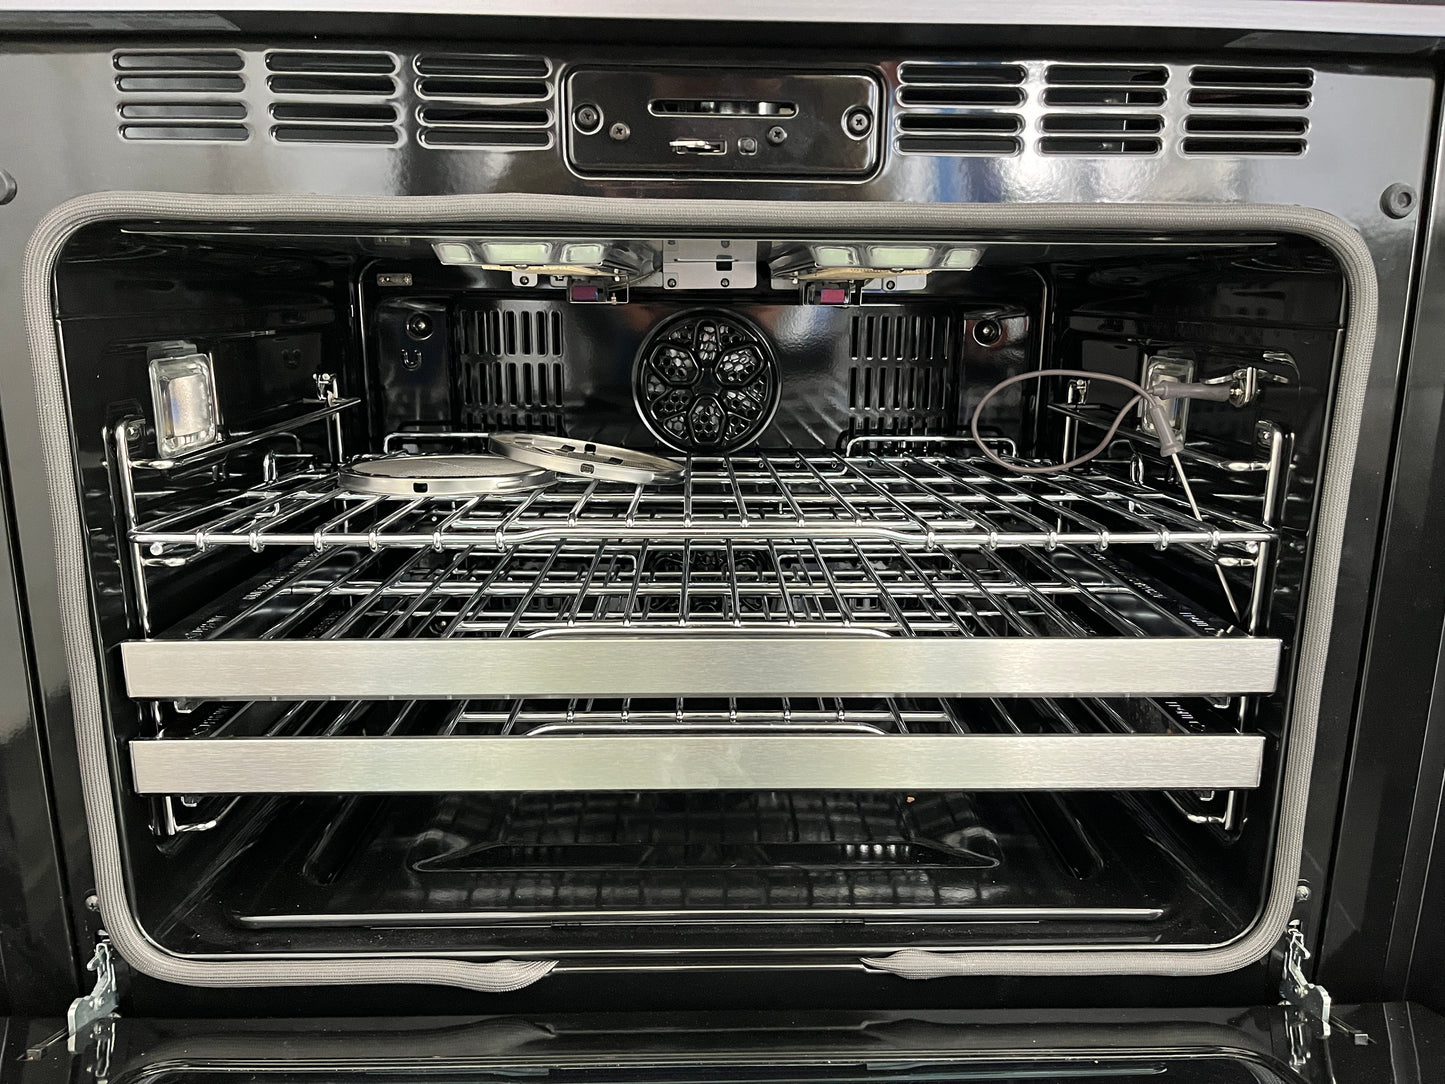 Dacor  DOP36M96GLM 36 Inch Professional Gas Range 6 Sealed Burners, 5.4 cu. ft. Oven Capacity, Self-Clean, and Dual-Stack Burners: Graphite Stainless ,369292